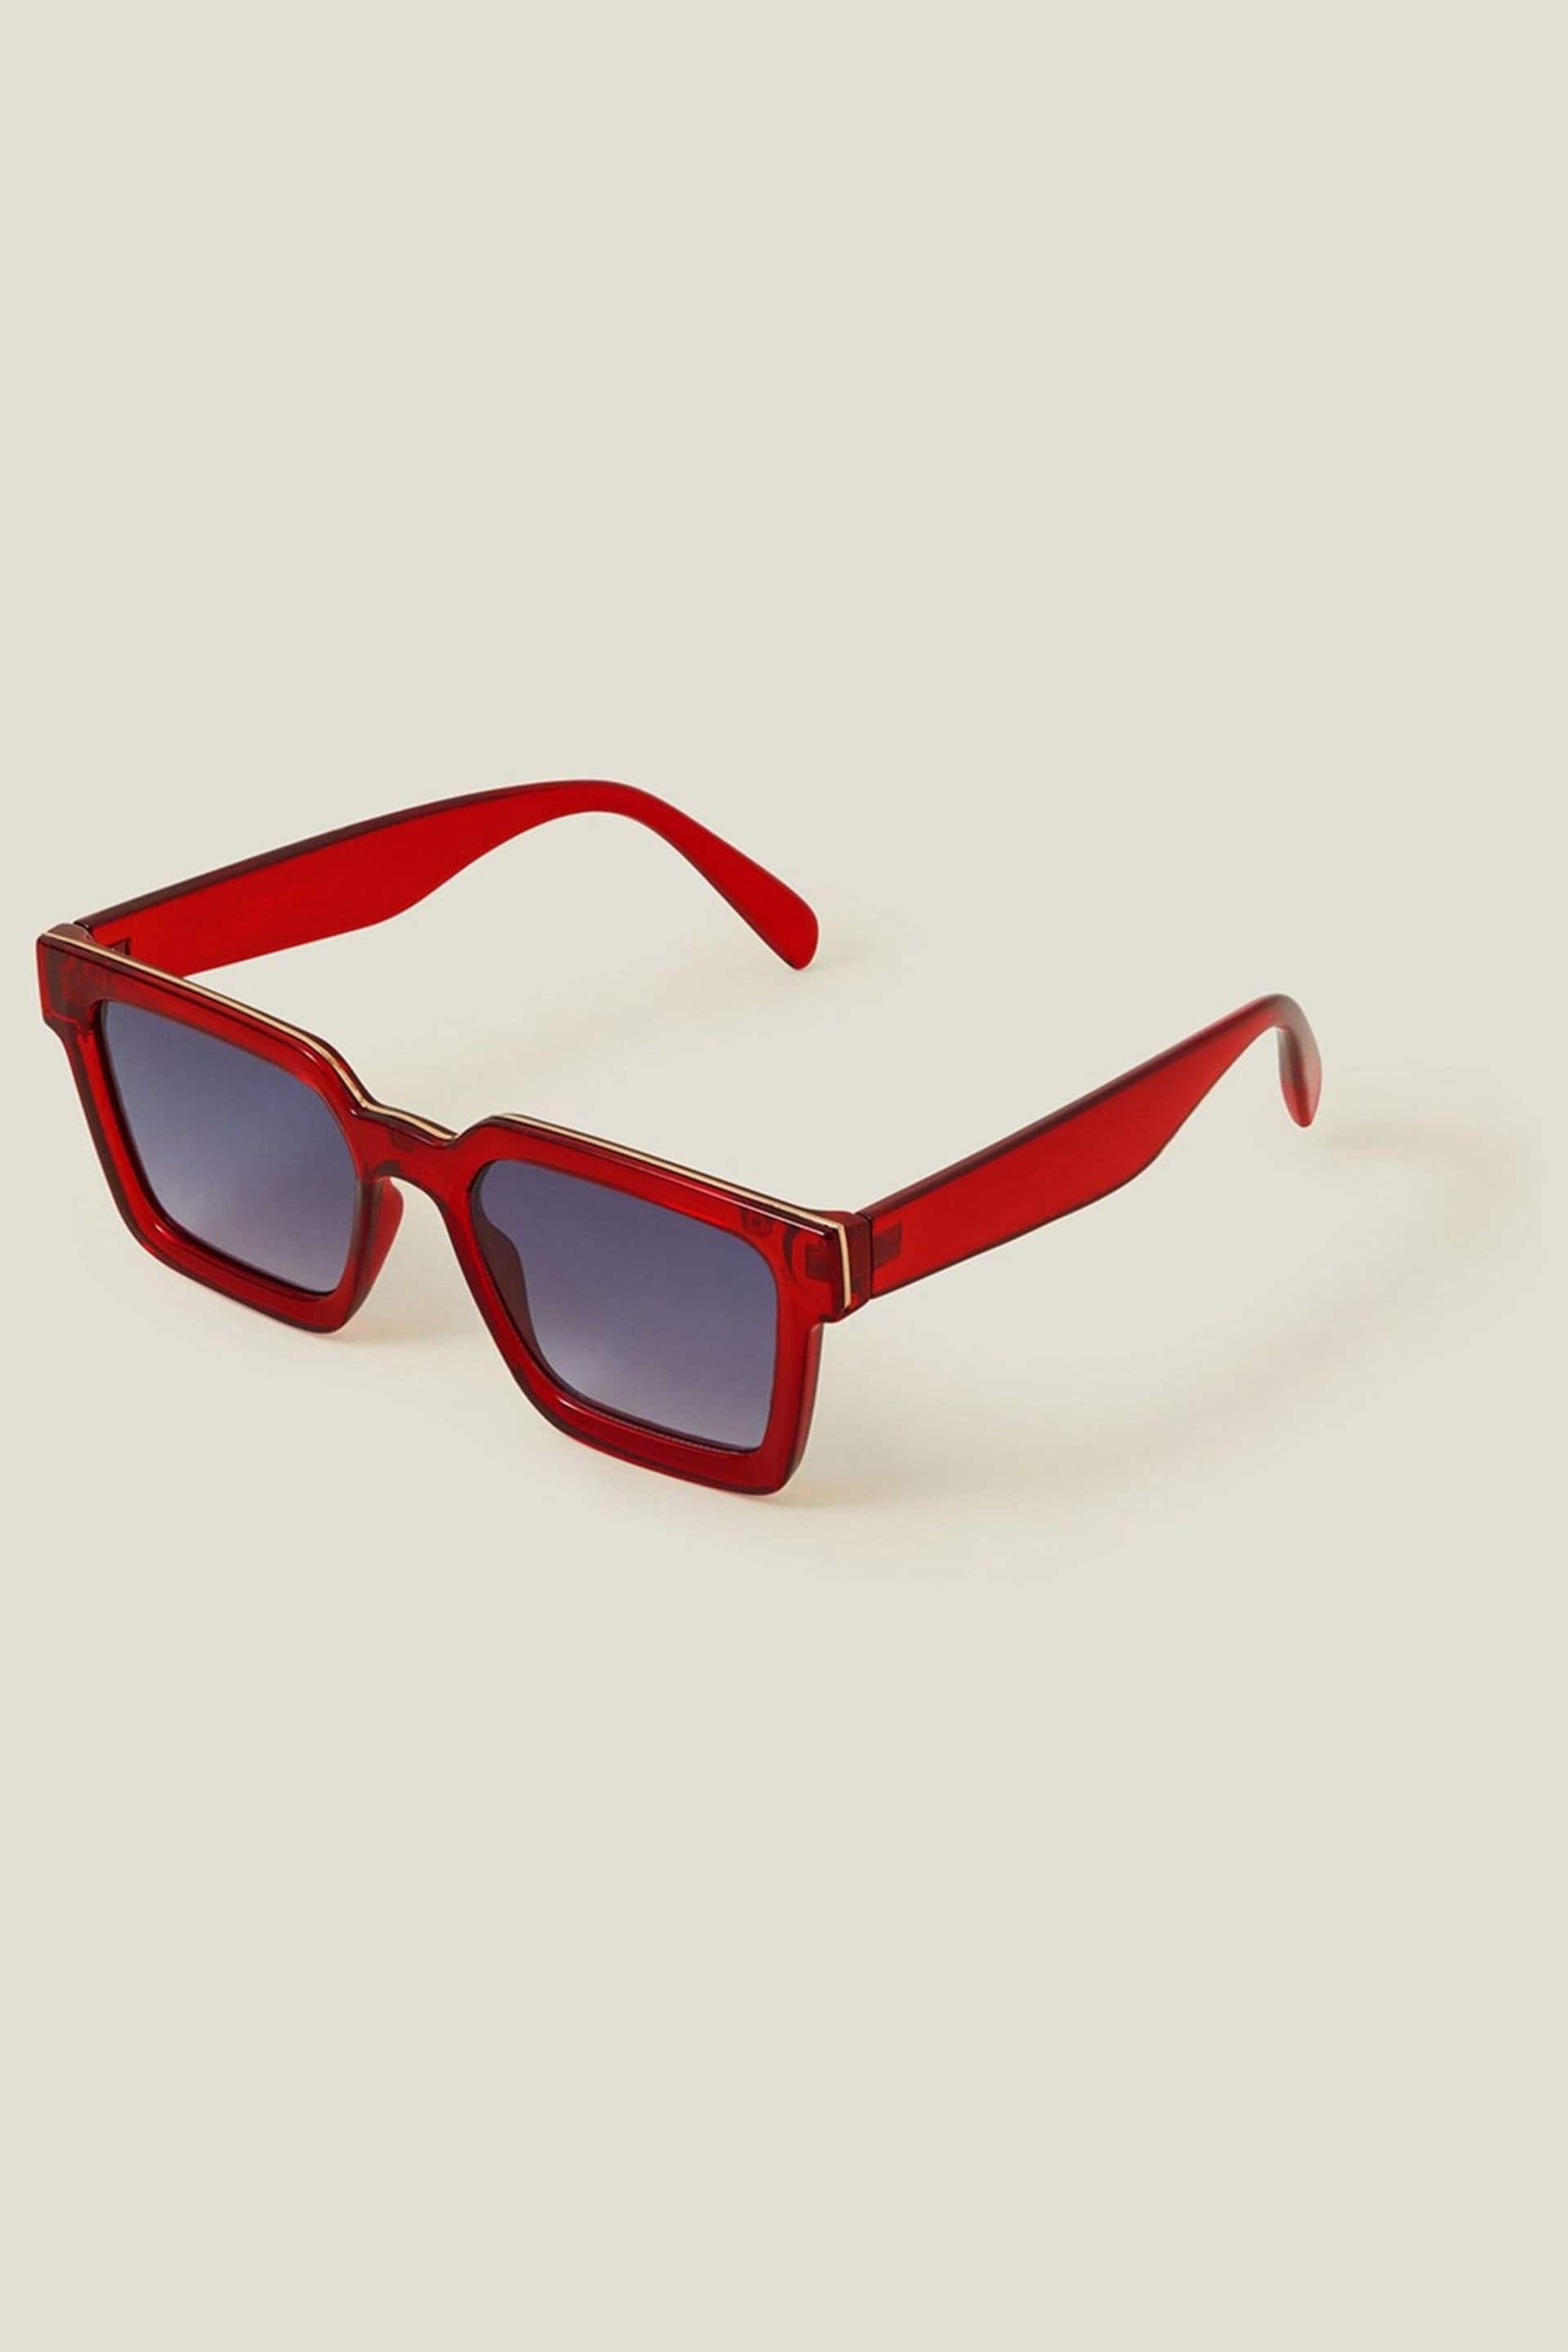 Accessorize Red Crystal Flat Top Sunglasses - Image 1 of 3